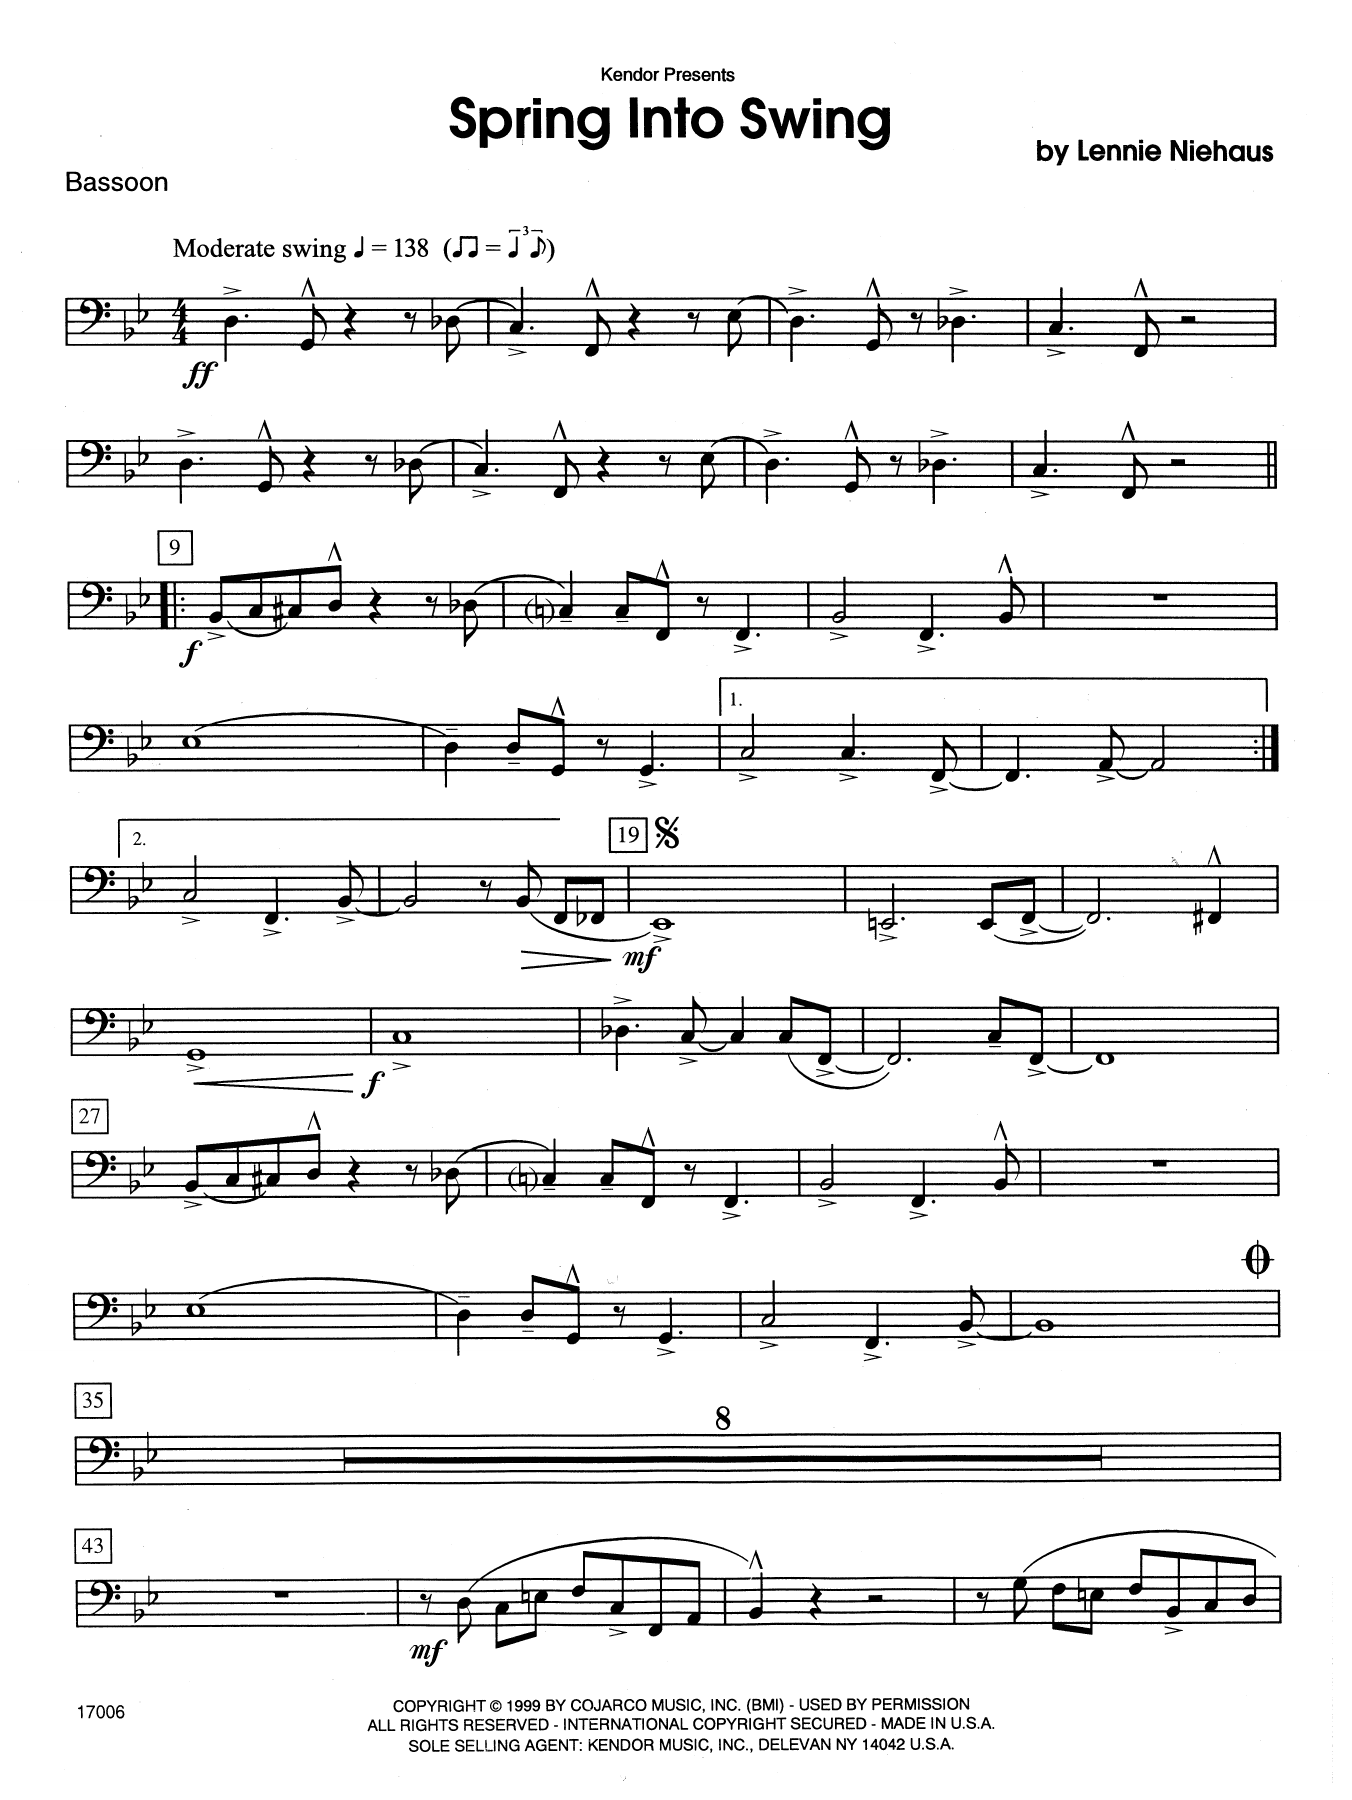 Lennie Niehaus Spring Into Swing - Bassoon sheet music notes and chords. Download Printable PDF.